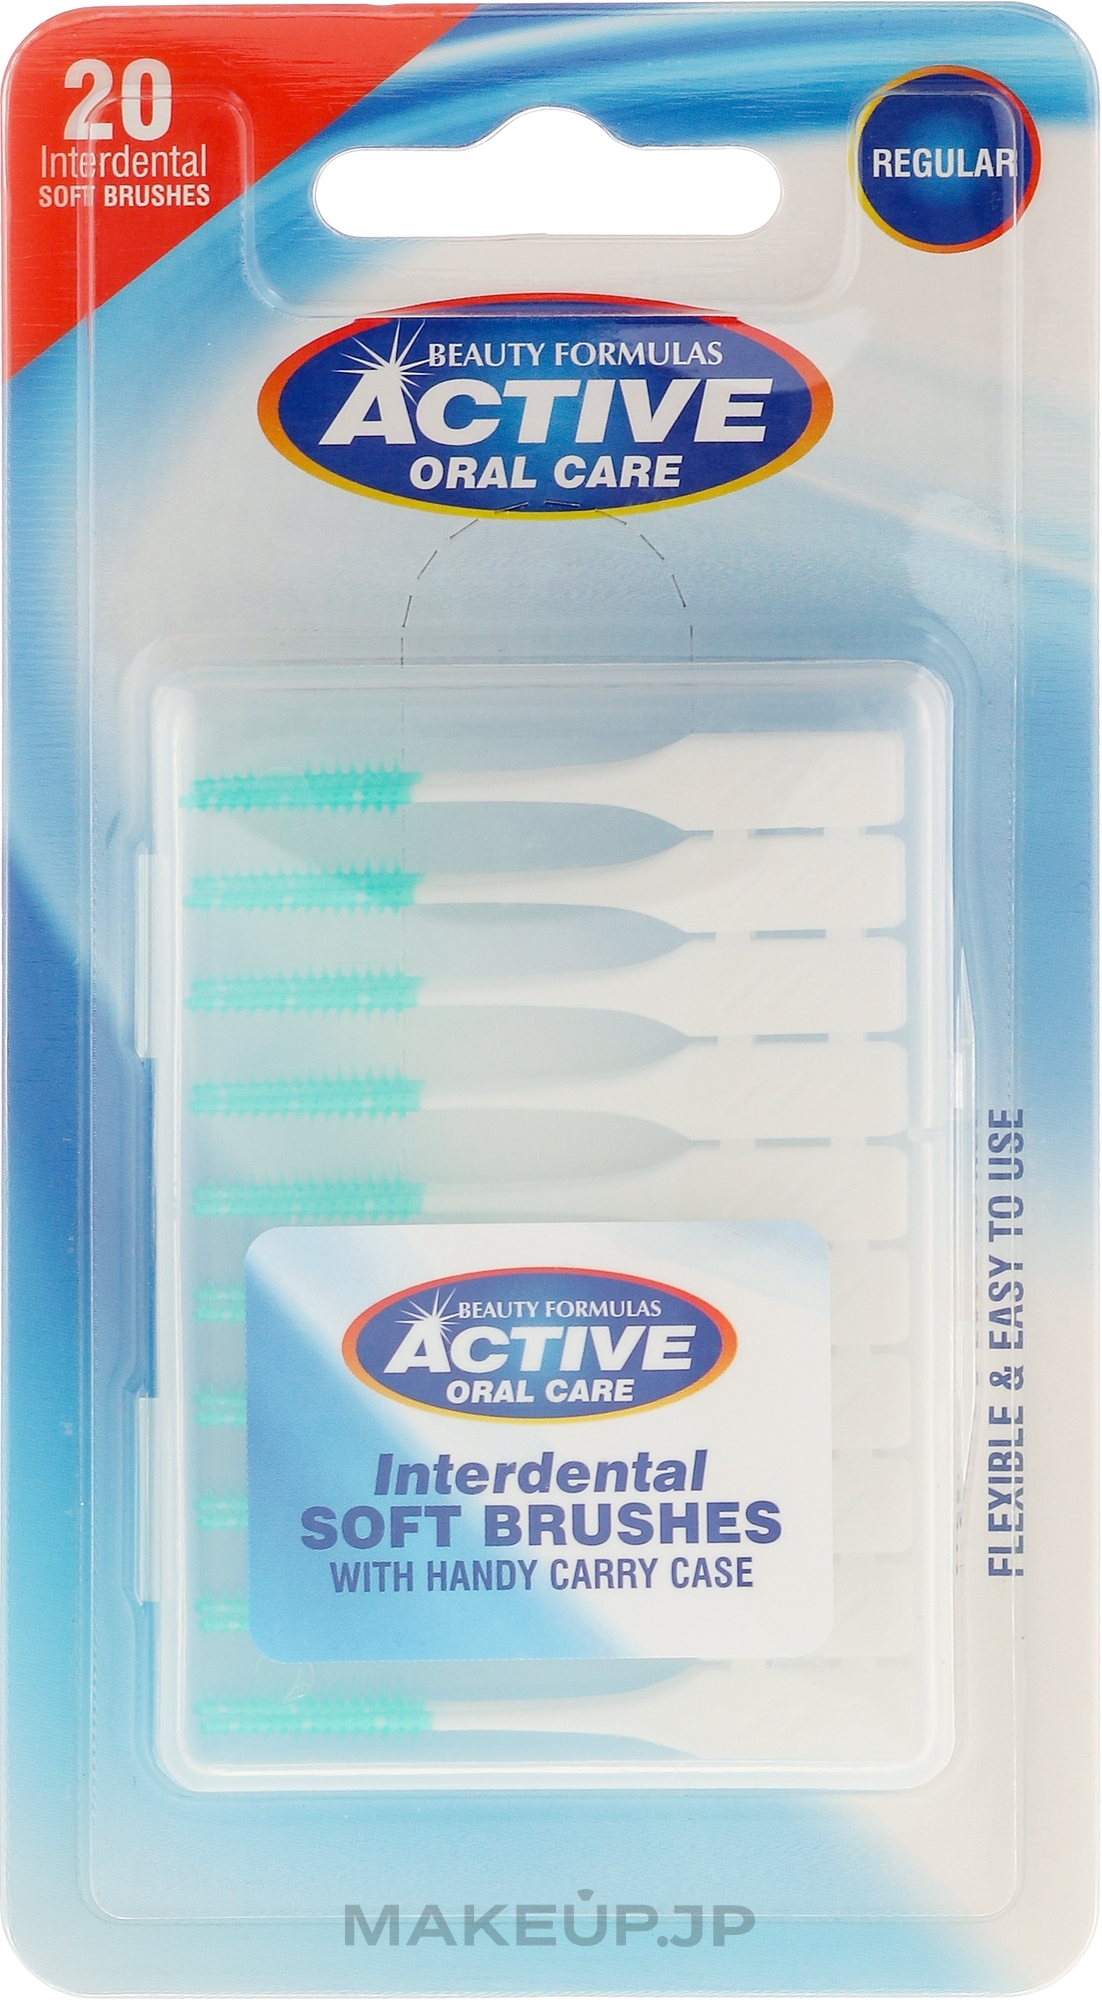 Interdental Brushes - Beauty Formulas Active Oral Care Interdental Soft Brushes  — photo 20 szt.